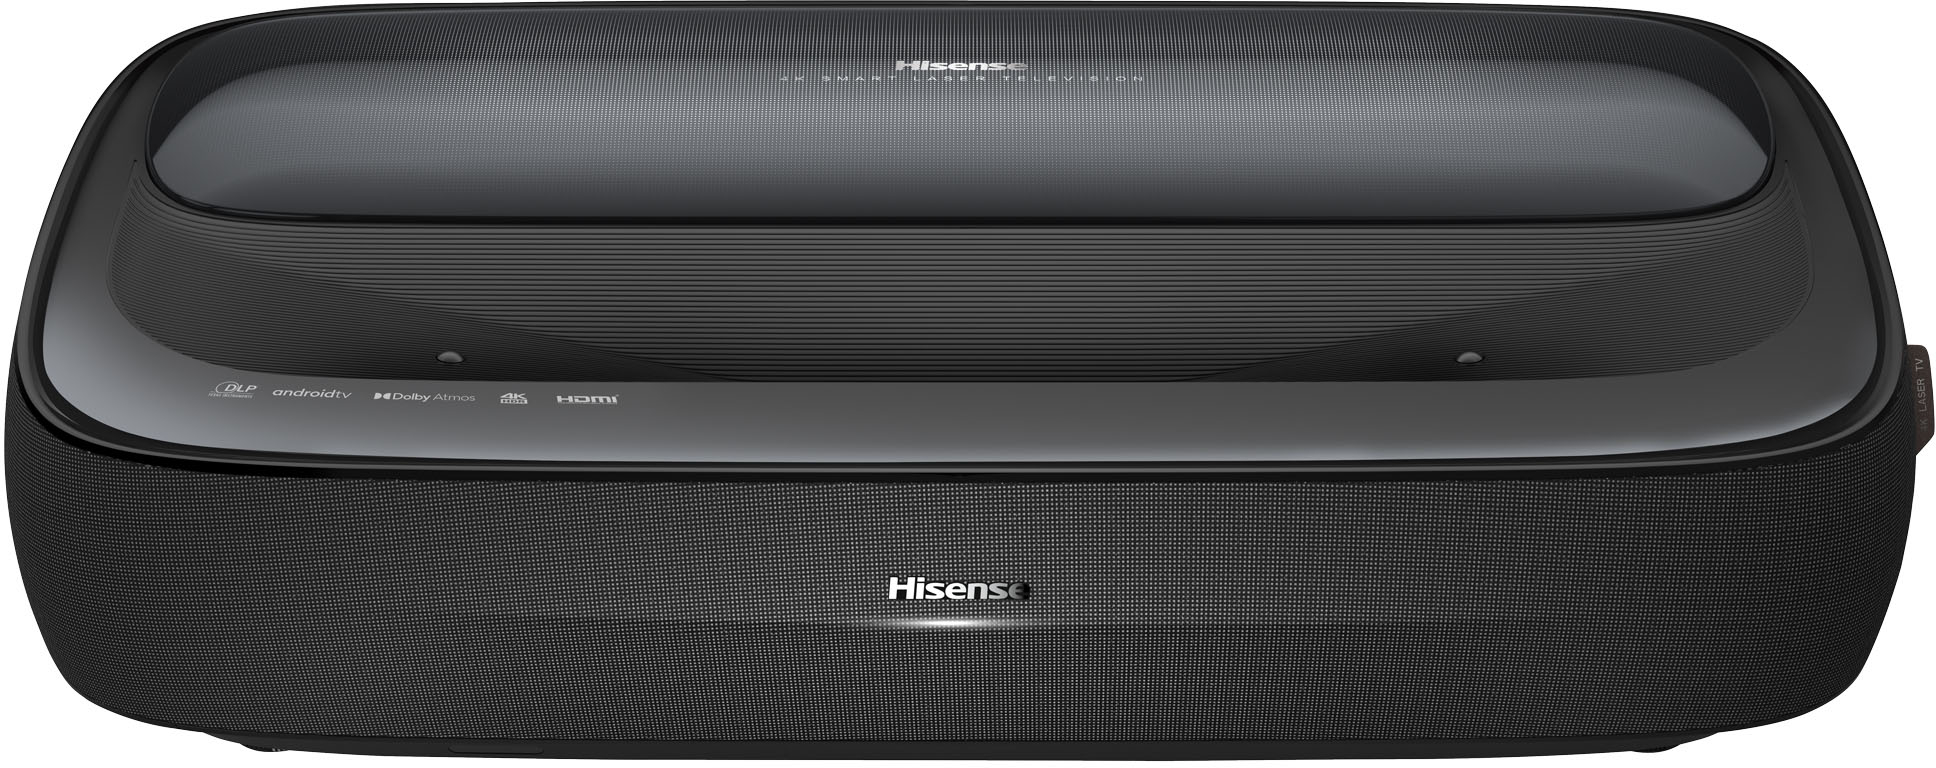 Hisense L5G Laser TV Ultra Short Throw Projector with  - Best Buy